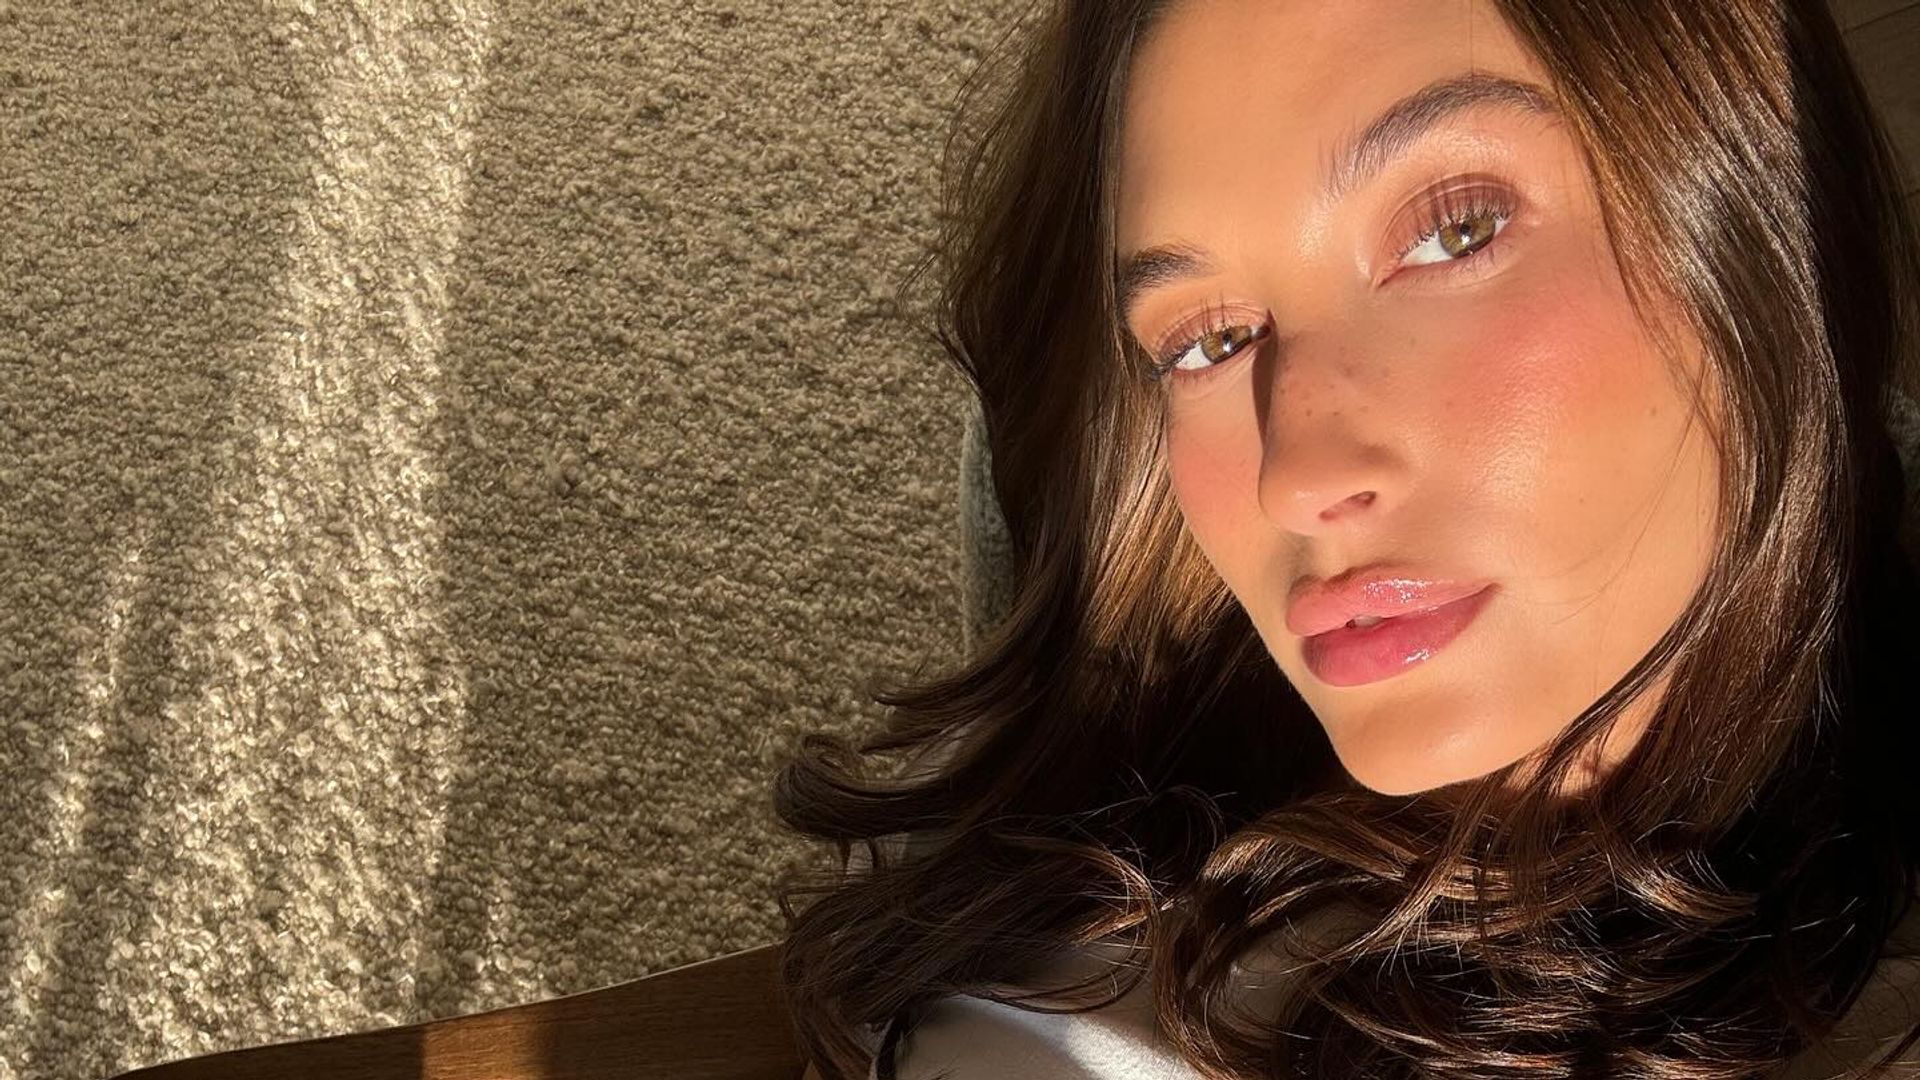 Do brunettes have more fun? Iris Law, Hailey Bieber and Lily Allen seem to think so this season